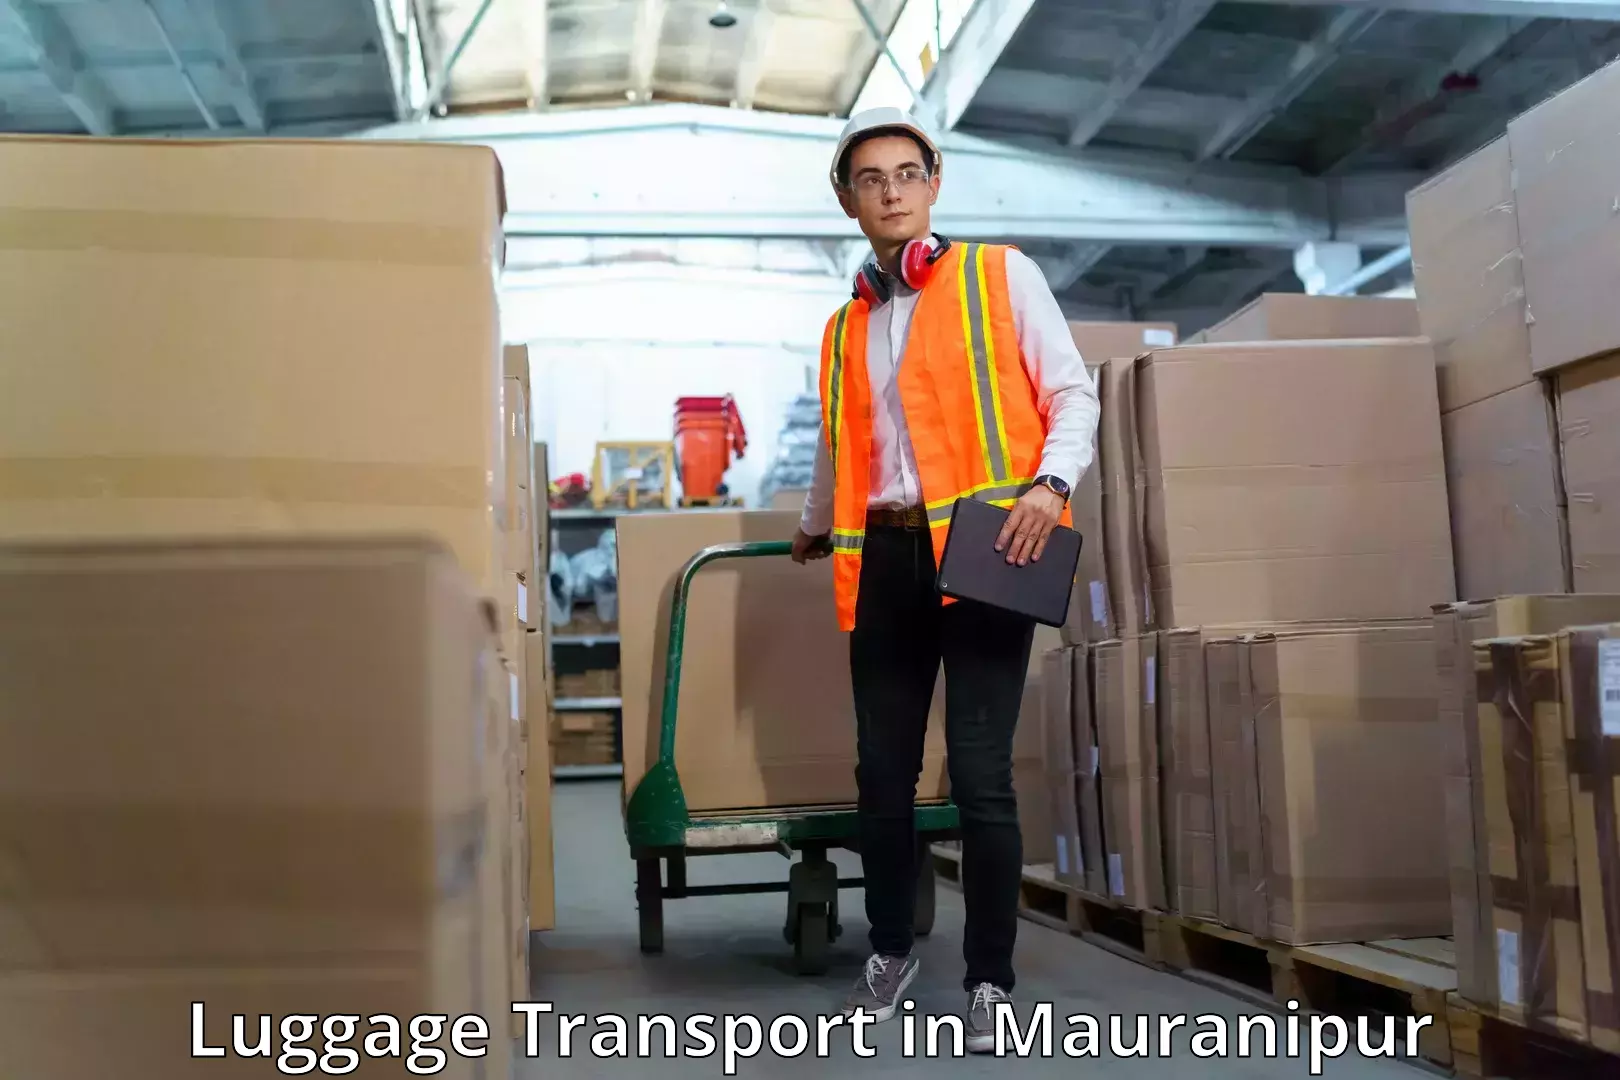 Luggage shipment tracking in Mauranipur